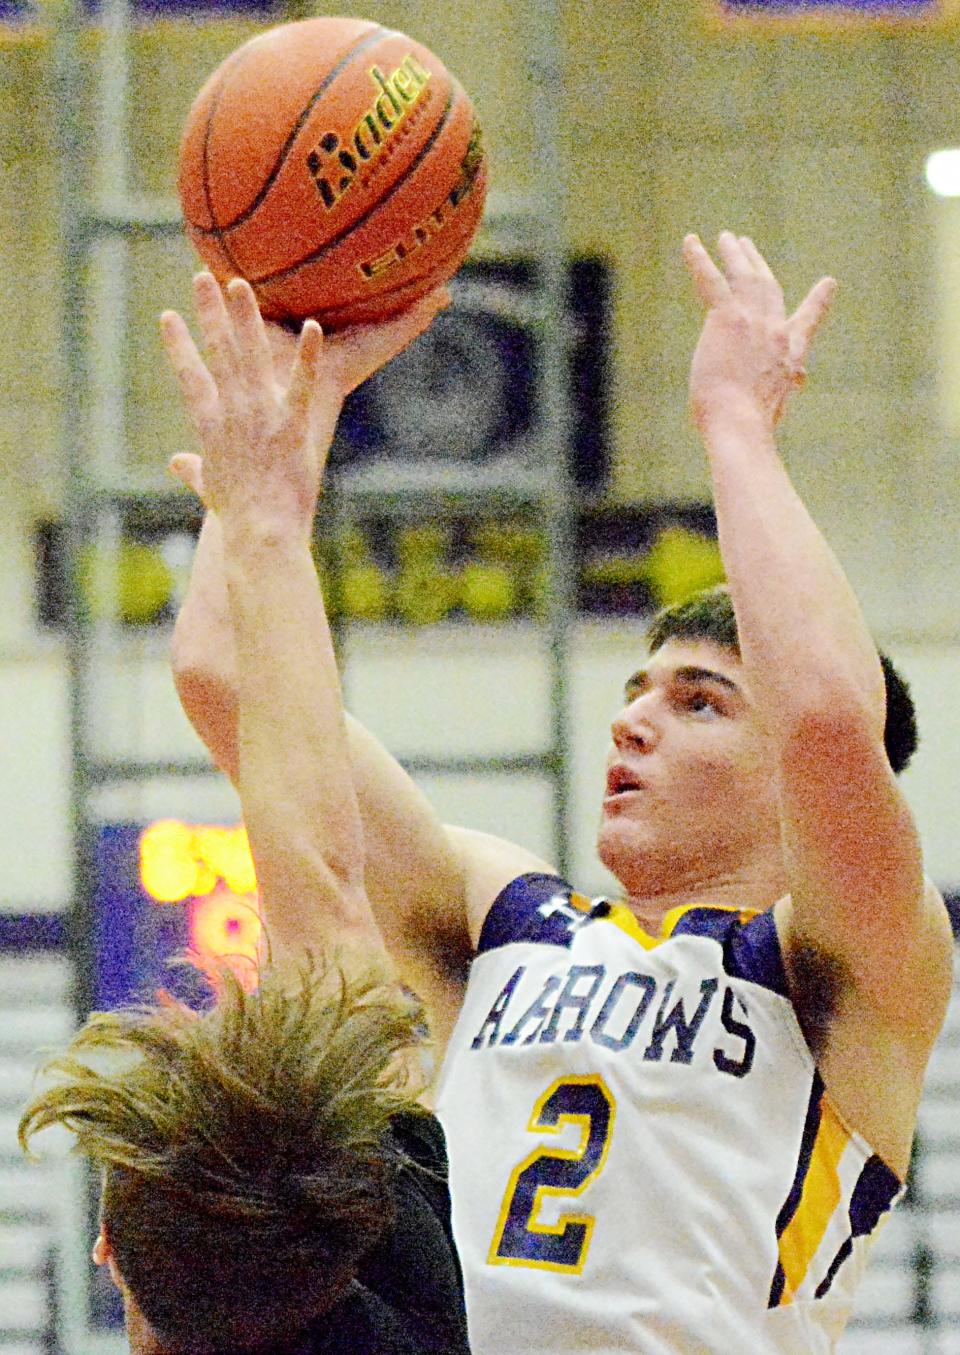 Watertown's Cole Holden puts a up a shot against Huron's Roger Puterbaugh during their Eastern South Dakota Conference boys basketball game Tuesday night in the Civic Arena. Watertown won 59-44.